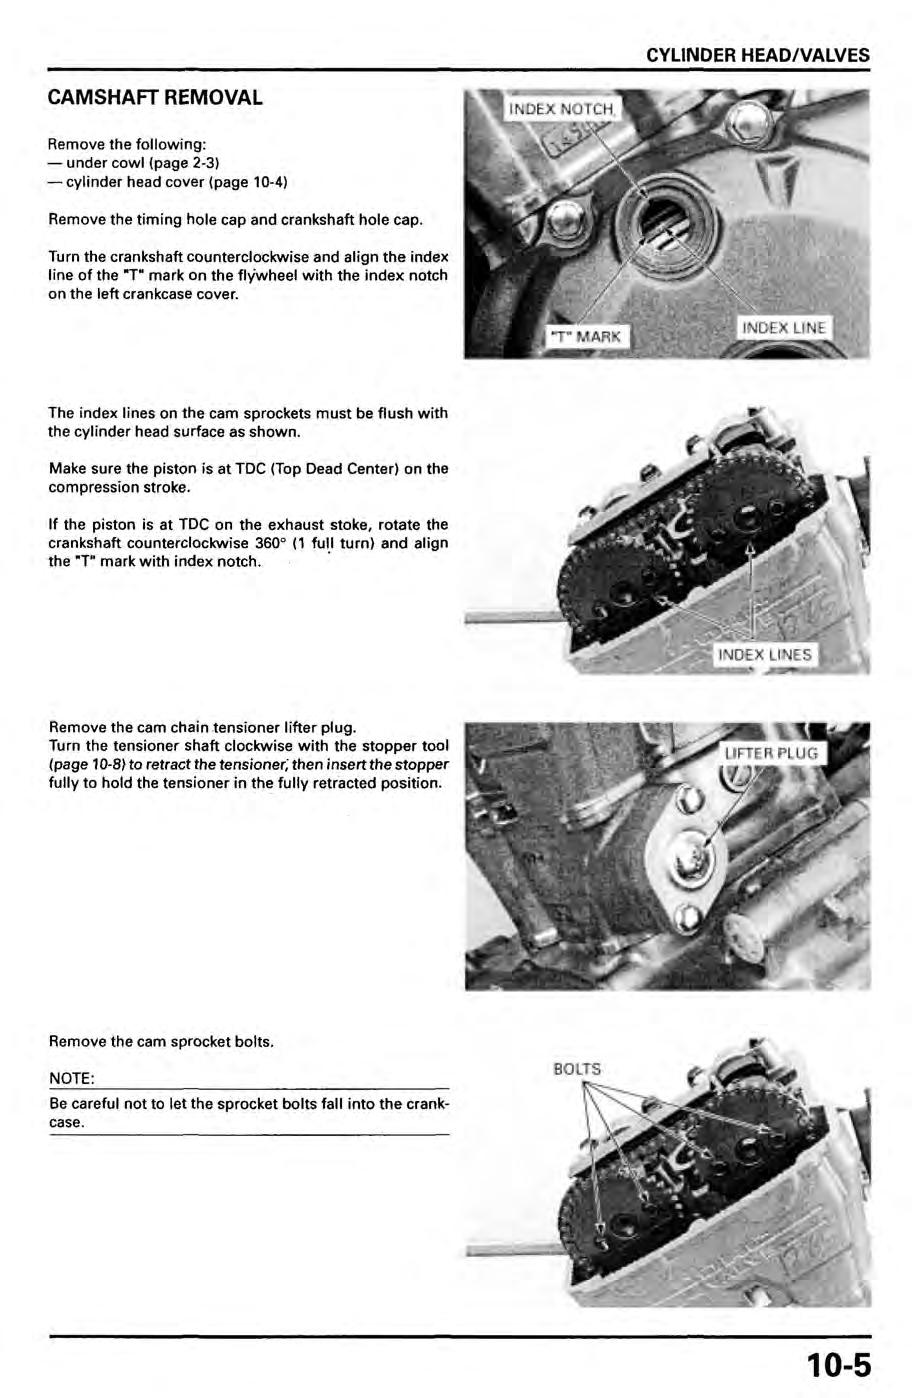 CYLINDER HEADNALVES HEADIVALVES CAMSHAFT REMOVAL Remove the following: - under cowl (page 2-3) -cylinder- head cover (page 10-4) Remove the timing hole cap and crankshaft hole cap.